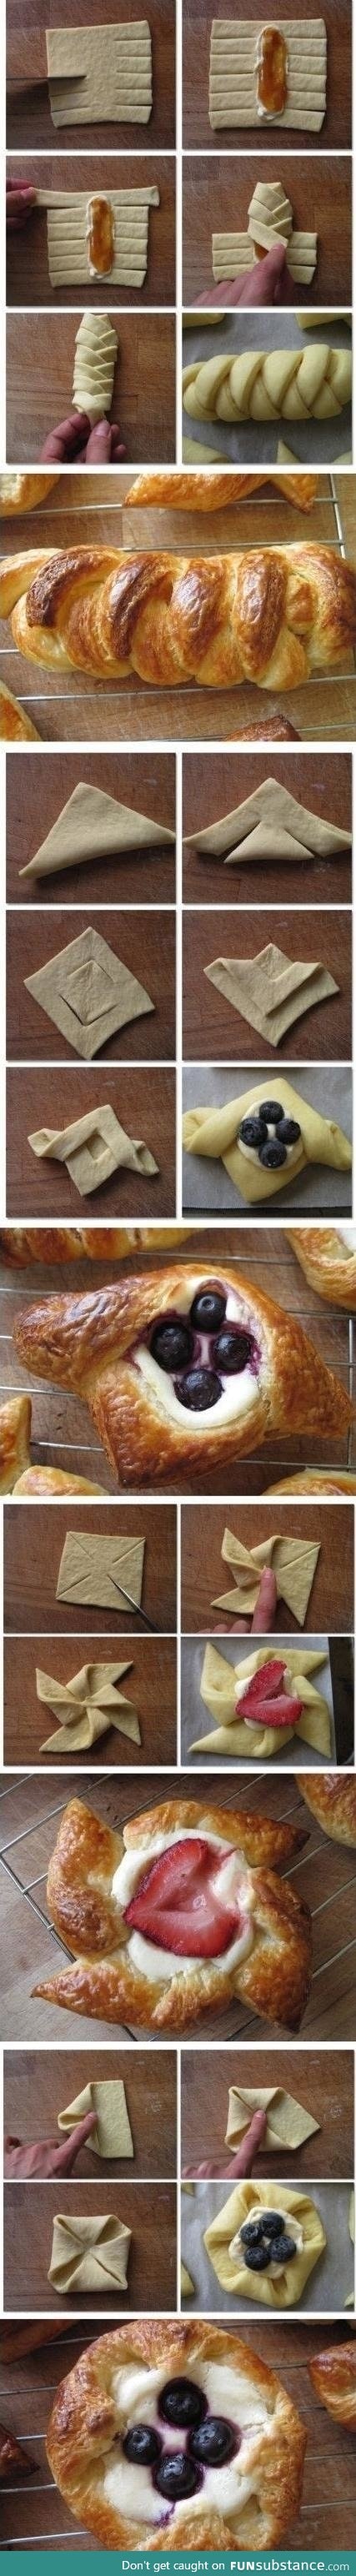 The art of folding pastry